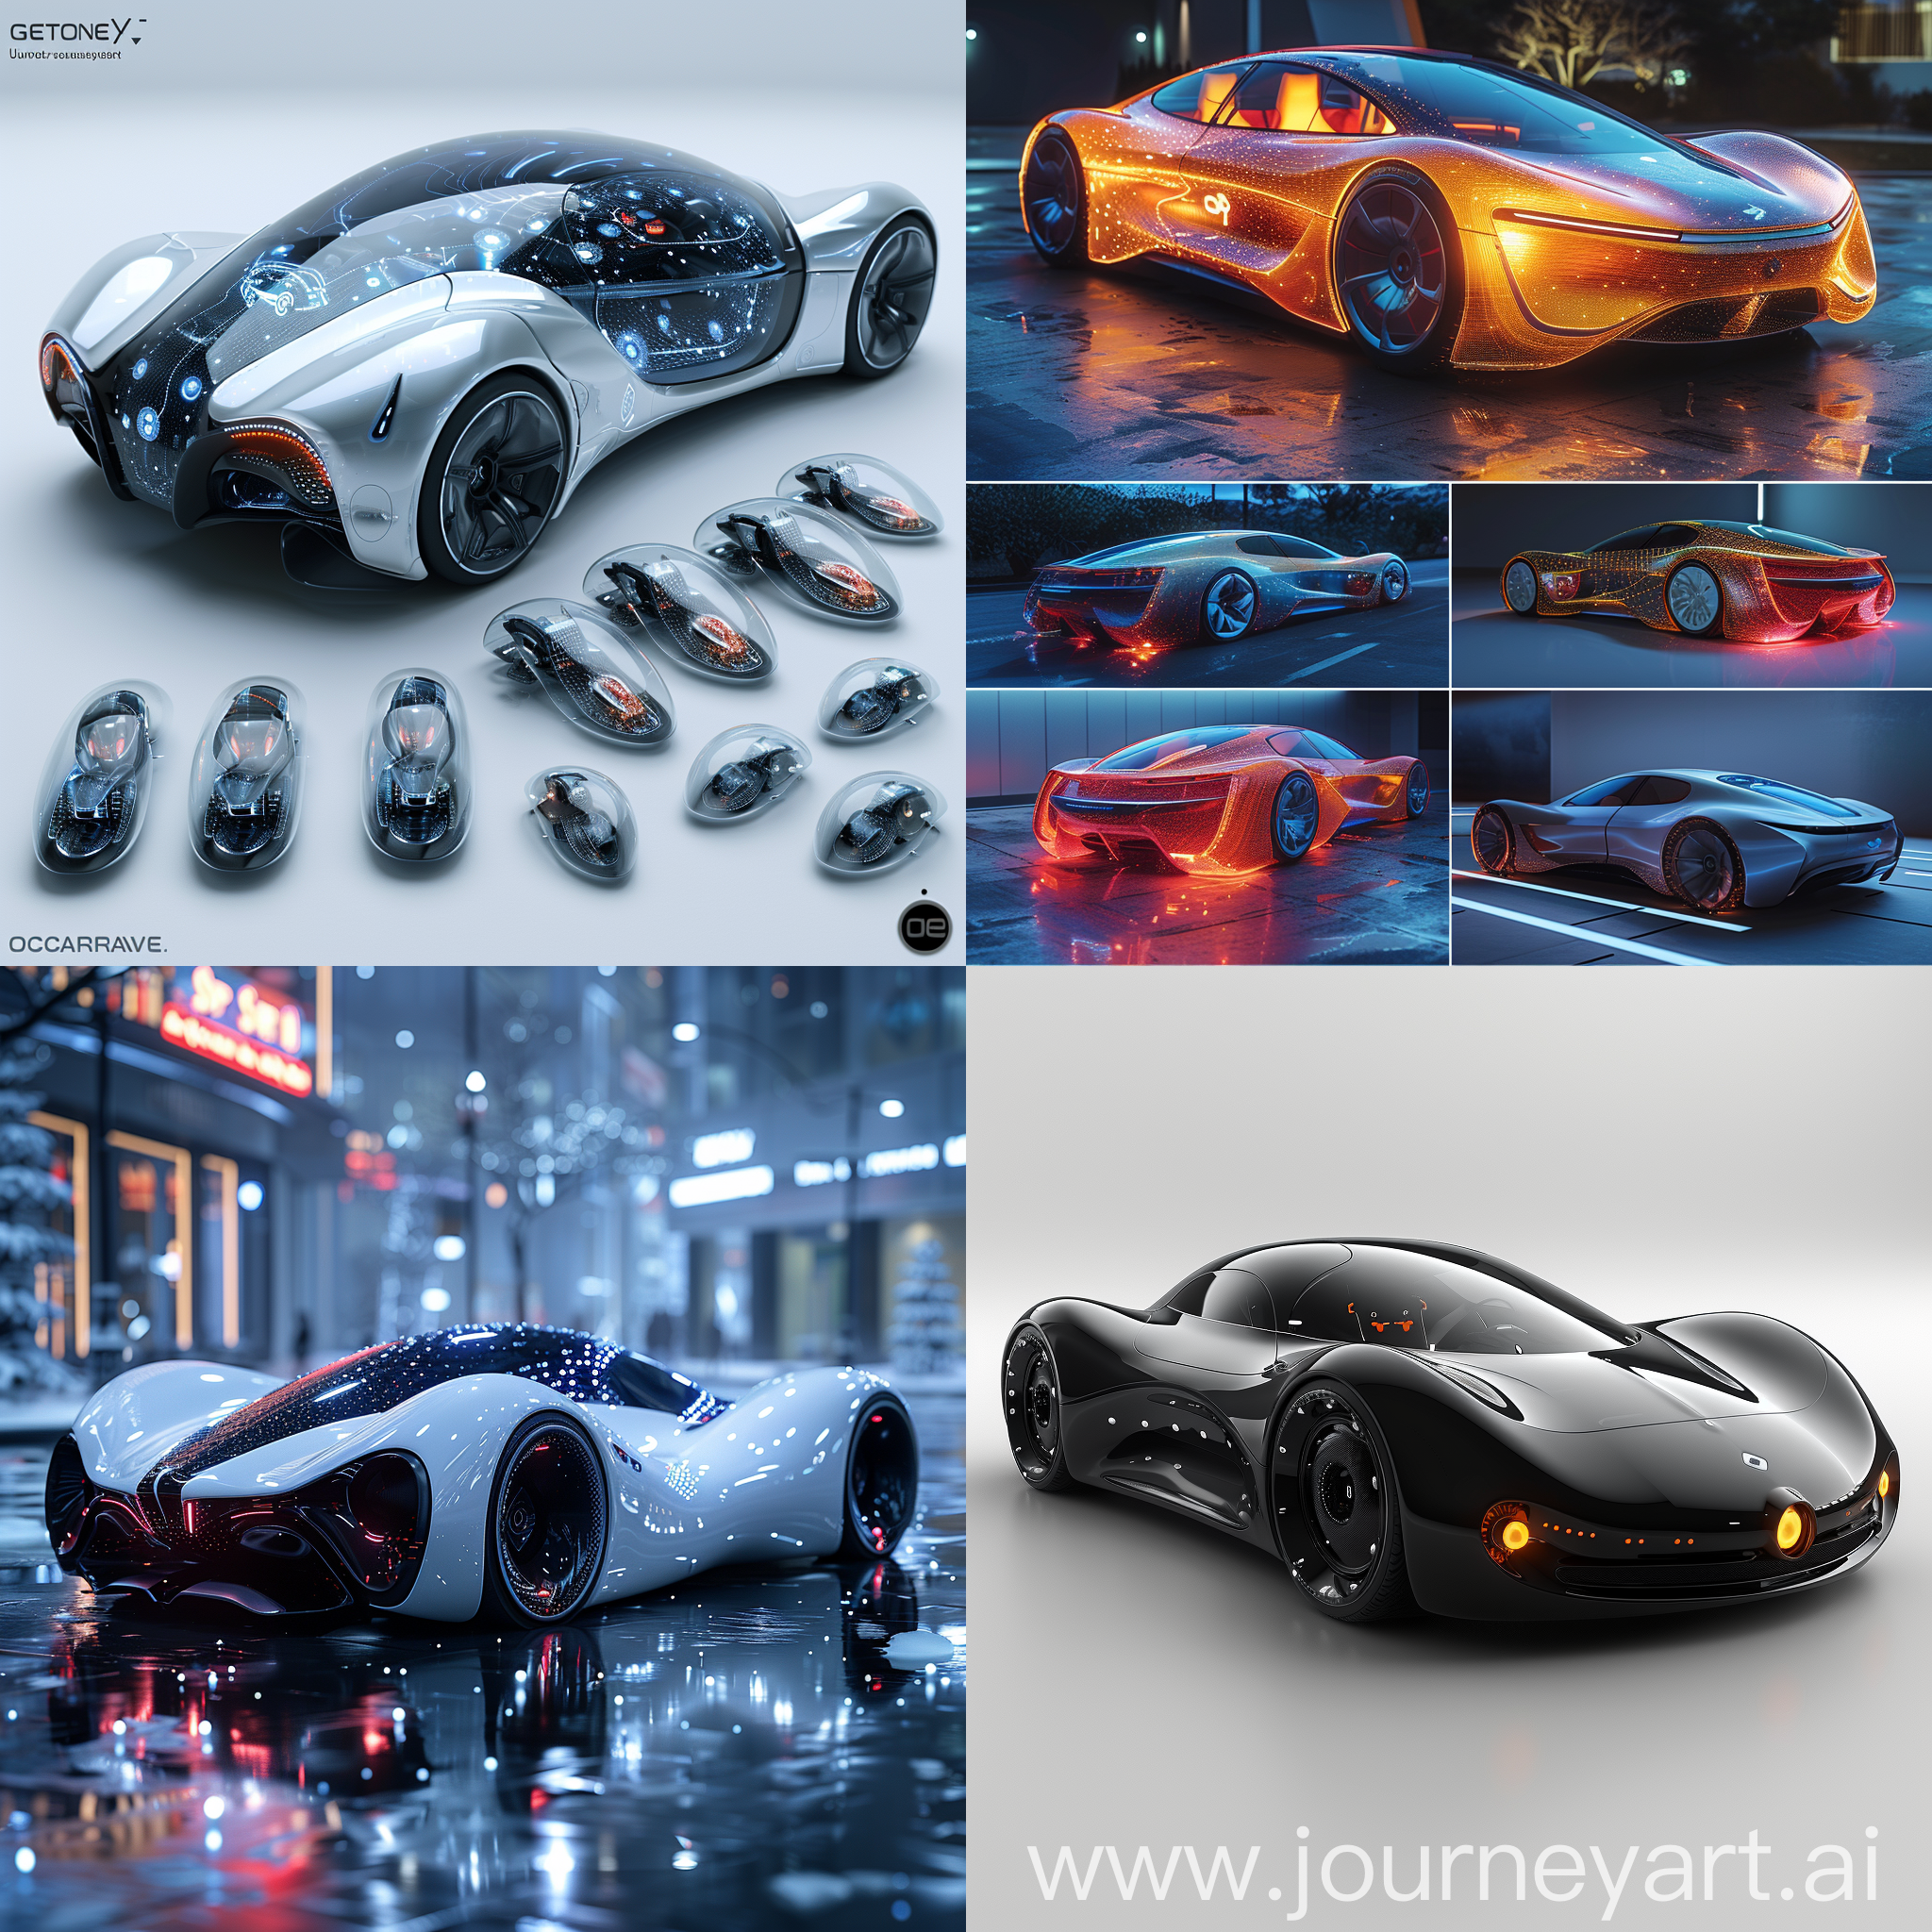 Futuristic car, futuristic features, Autonomous Driving, Vehicle-to-Vehicle Communication (V2V), Augmented Reality Windshield, Holographic Displays, Biometric Integration, Self-Healing Materials, Shape-Shifting Interiors, Advanced Driver Assistance Systems (ADAS), Solar Power, In-Car Entertainment Systems, octane render --stylize 1000